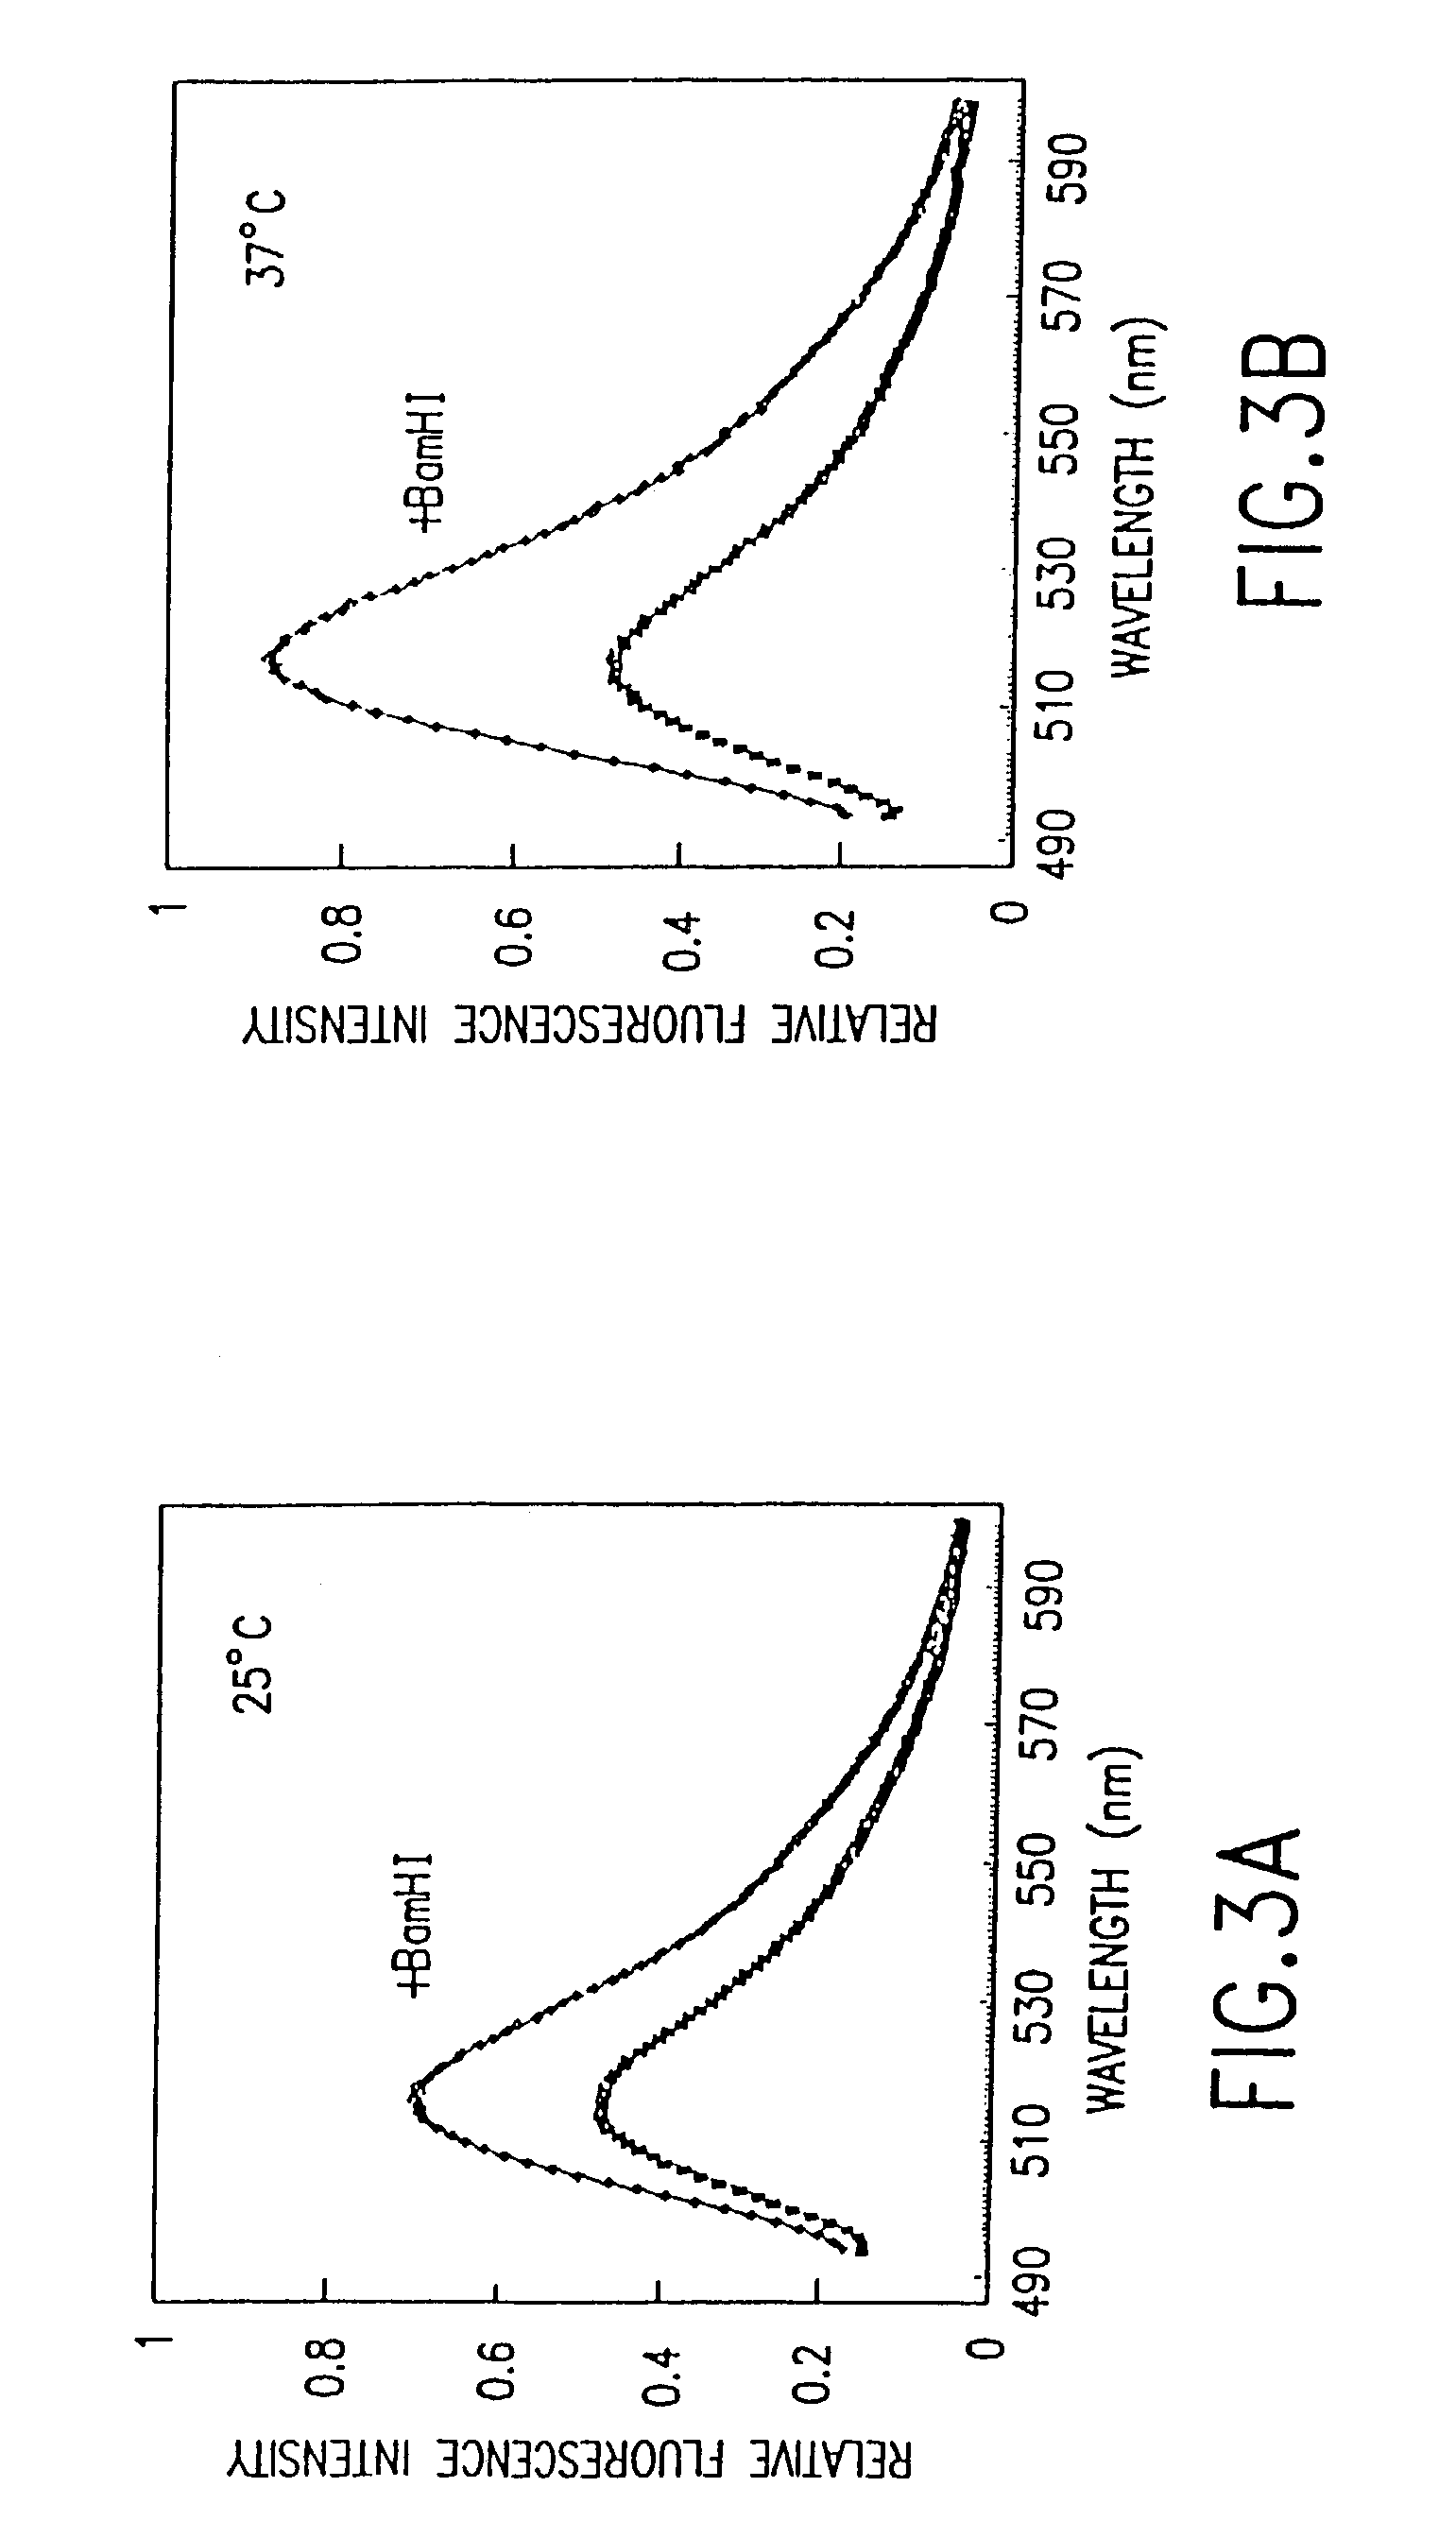 Fluorometric assay for detecting nucleic acid cleavage